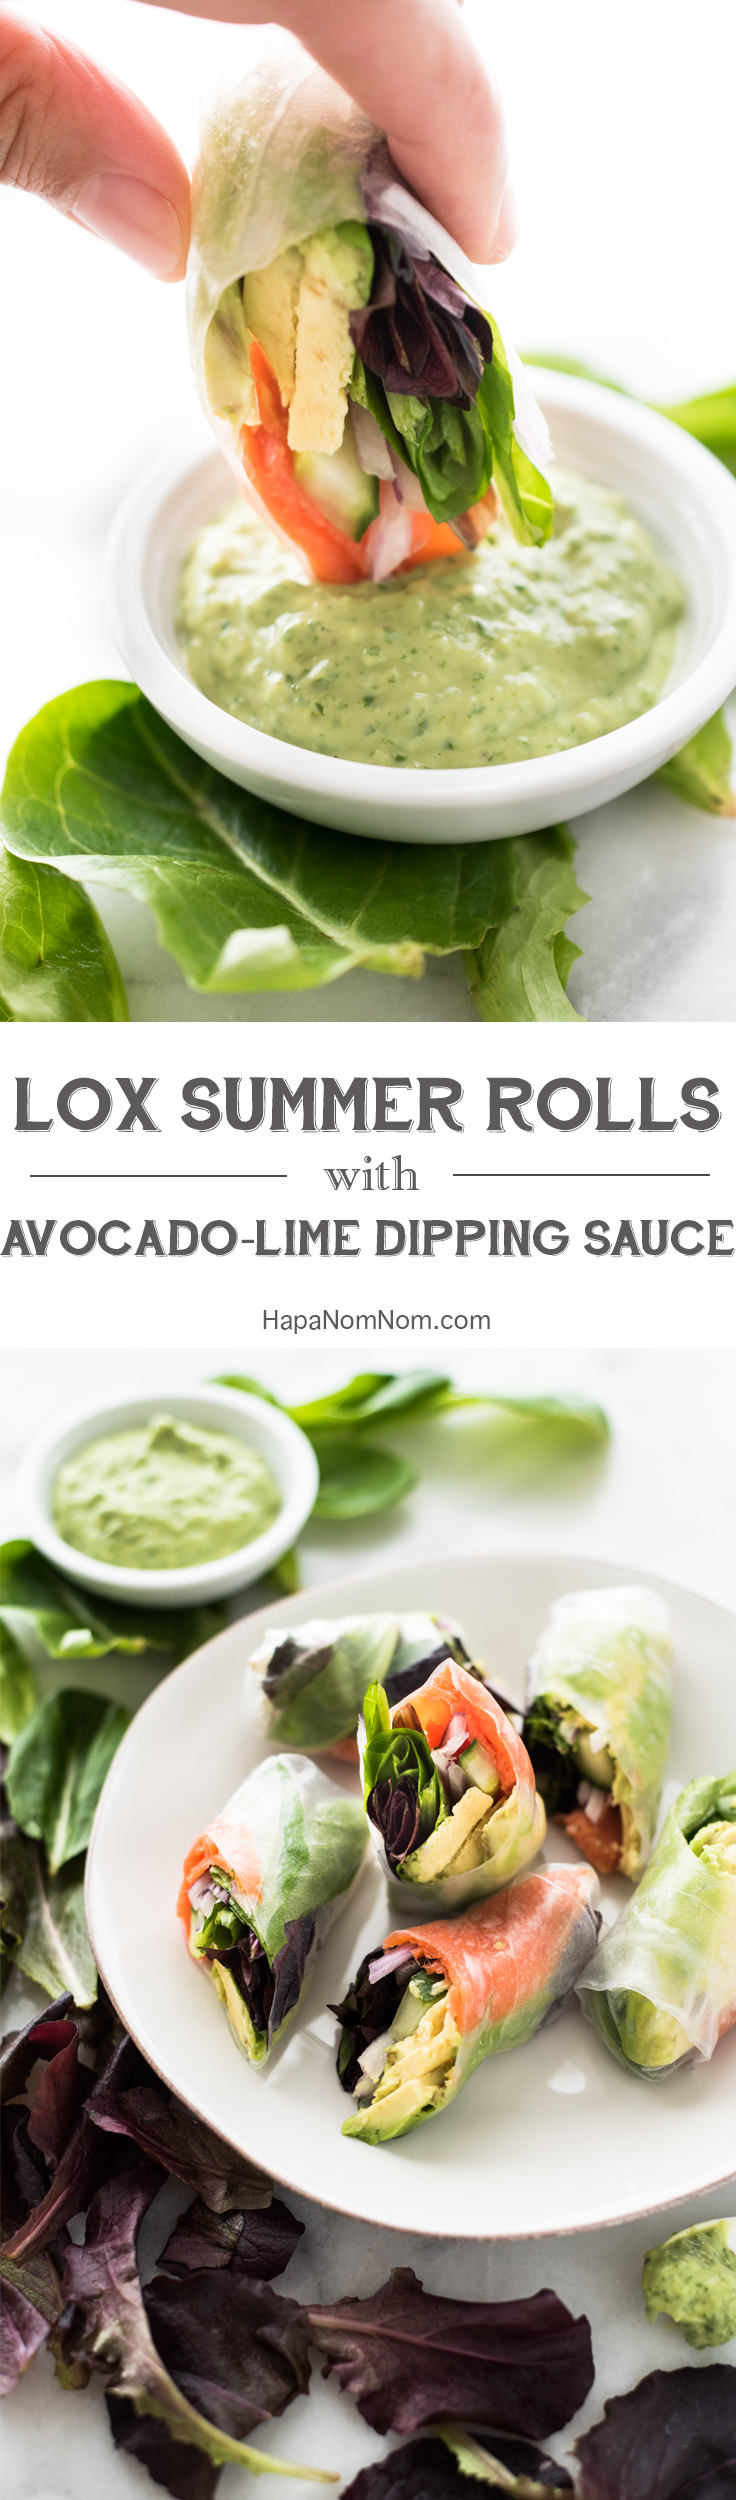 Lox Summer Rolls with Avocado-Lime Dipping Sauce - a Vietnamese twist on a Jewish deli classic